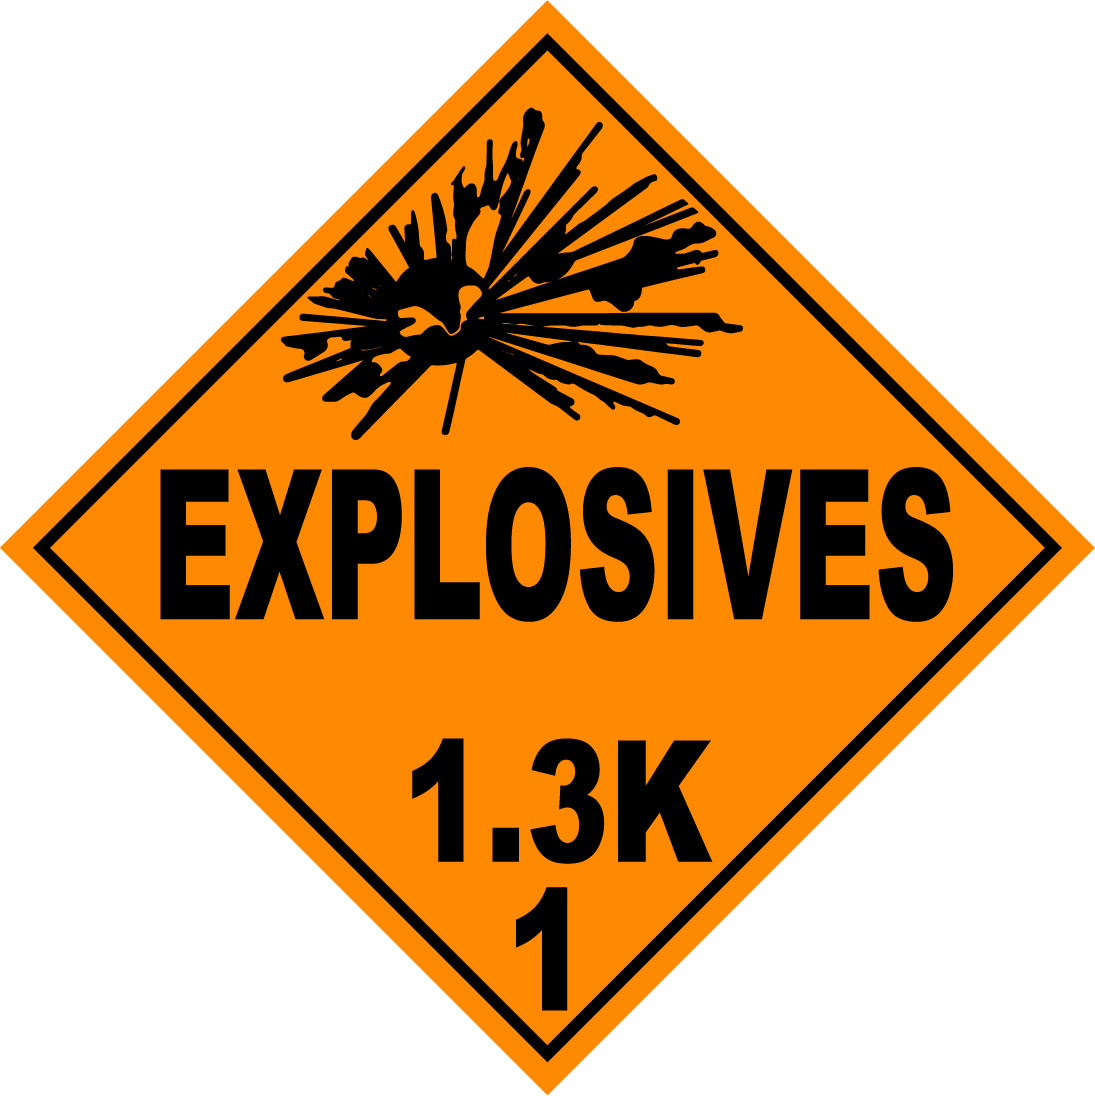 Class 1.3K Explosives Hazmat Placard Decal or Magnetic Sign Placard